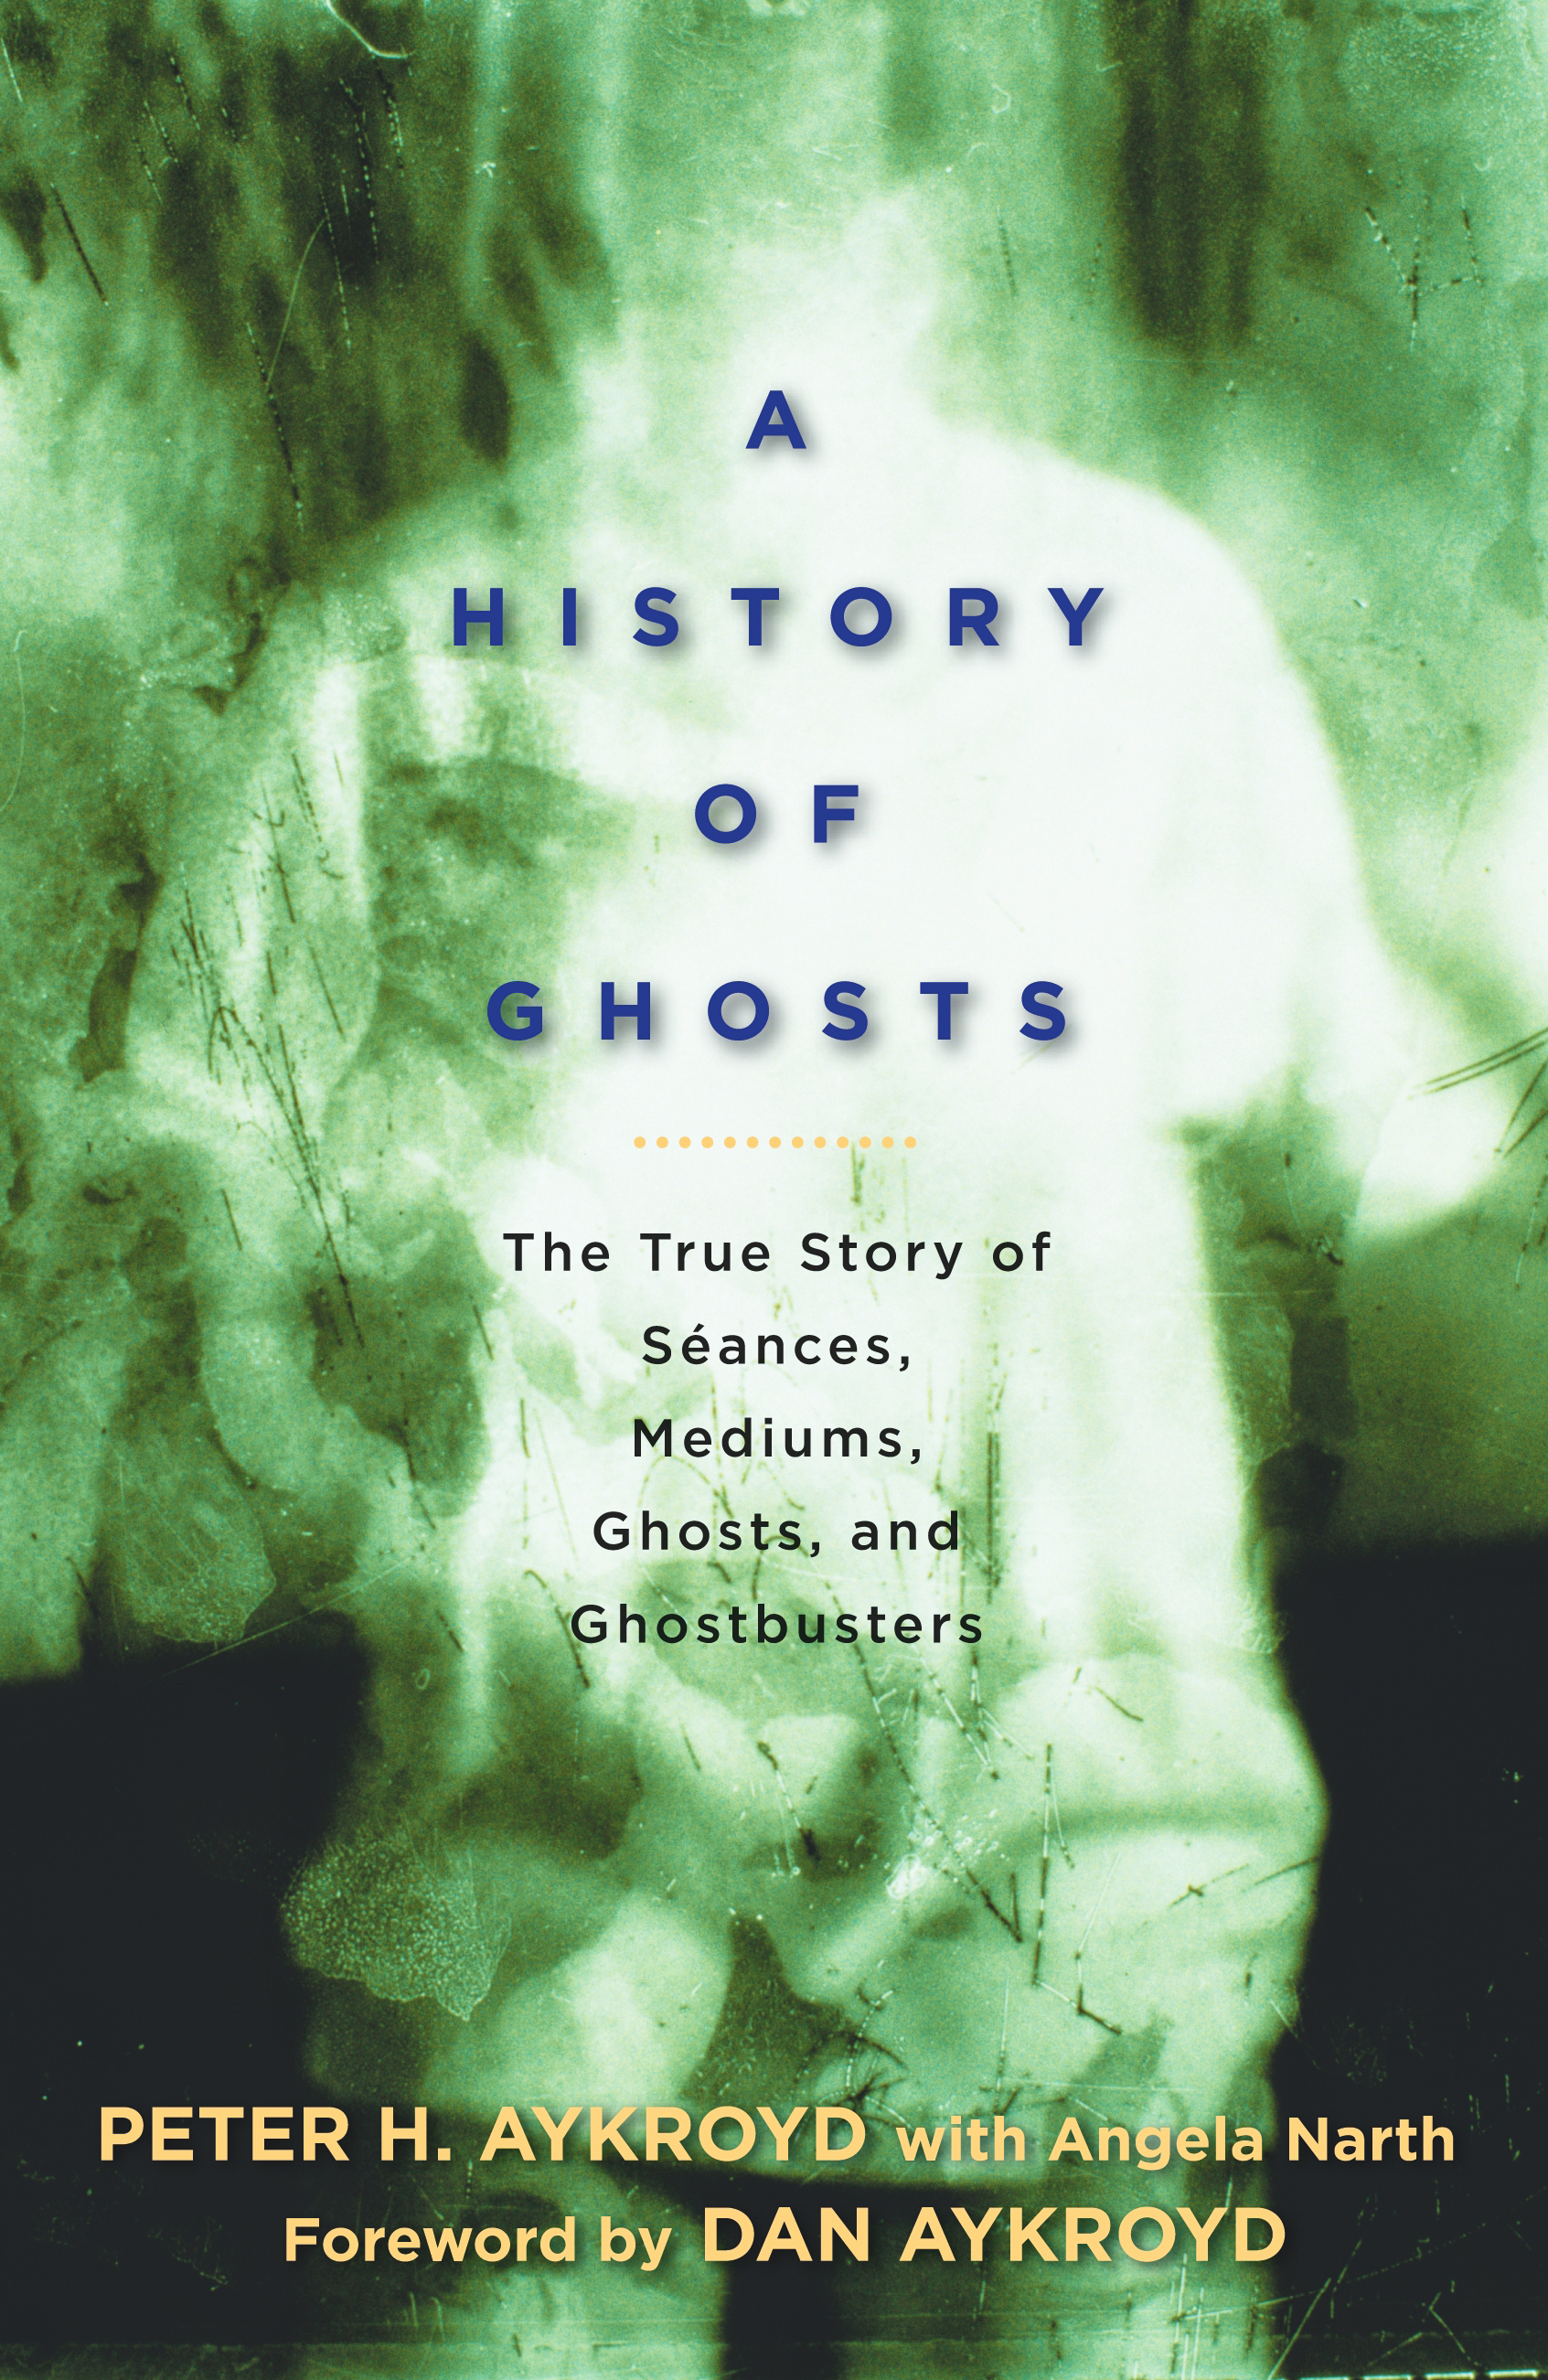 La copertina di A History of Ghosts: The True Story of Séances, Mediums, Ghosts, and Ghostbusters di Peter Aykroyd, 2009